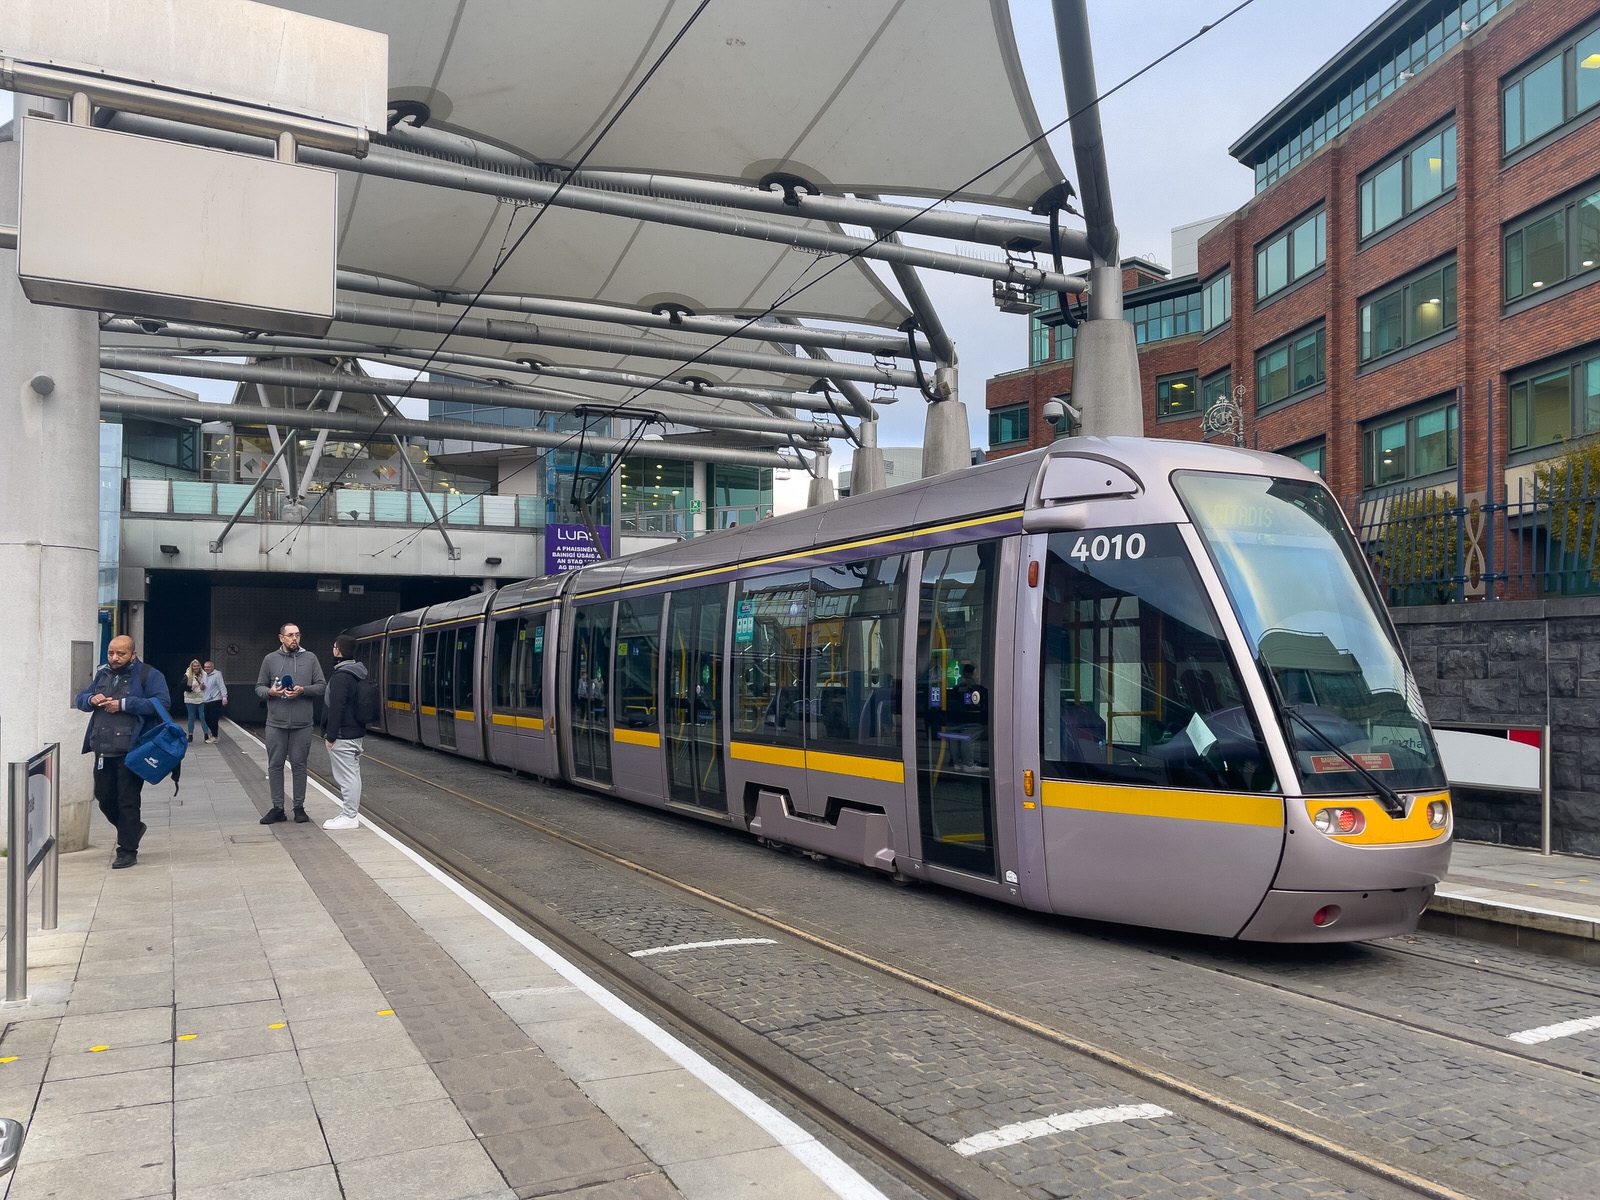 TRAM 4010 WAS STRANDED AT CONNOLLY STATION [DAY AFTER RIOT IN CITY CENTRE]-225317-1